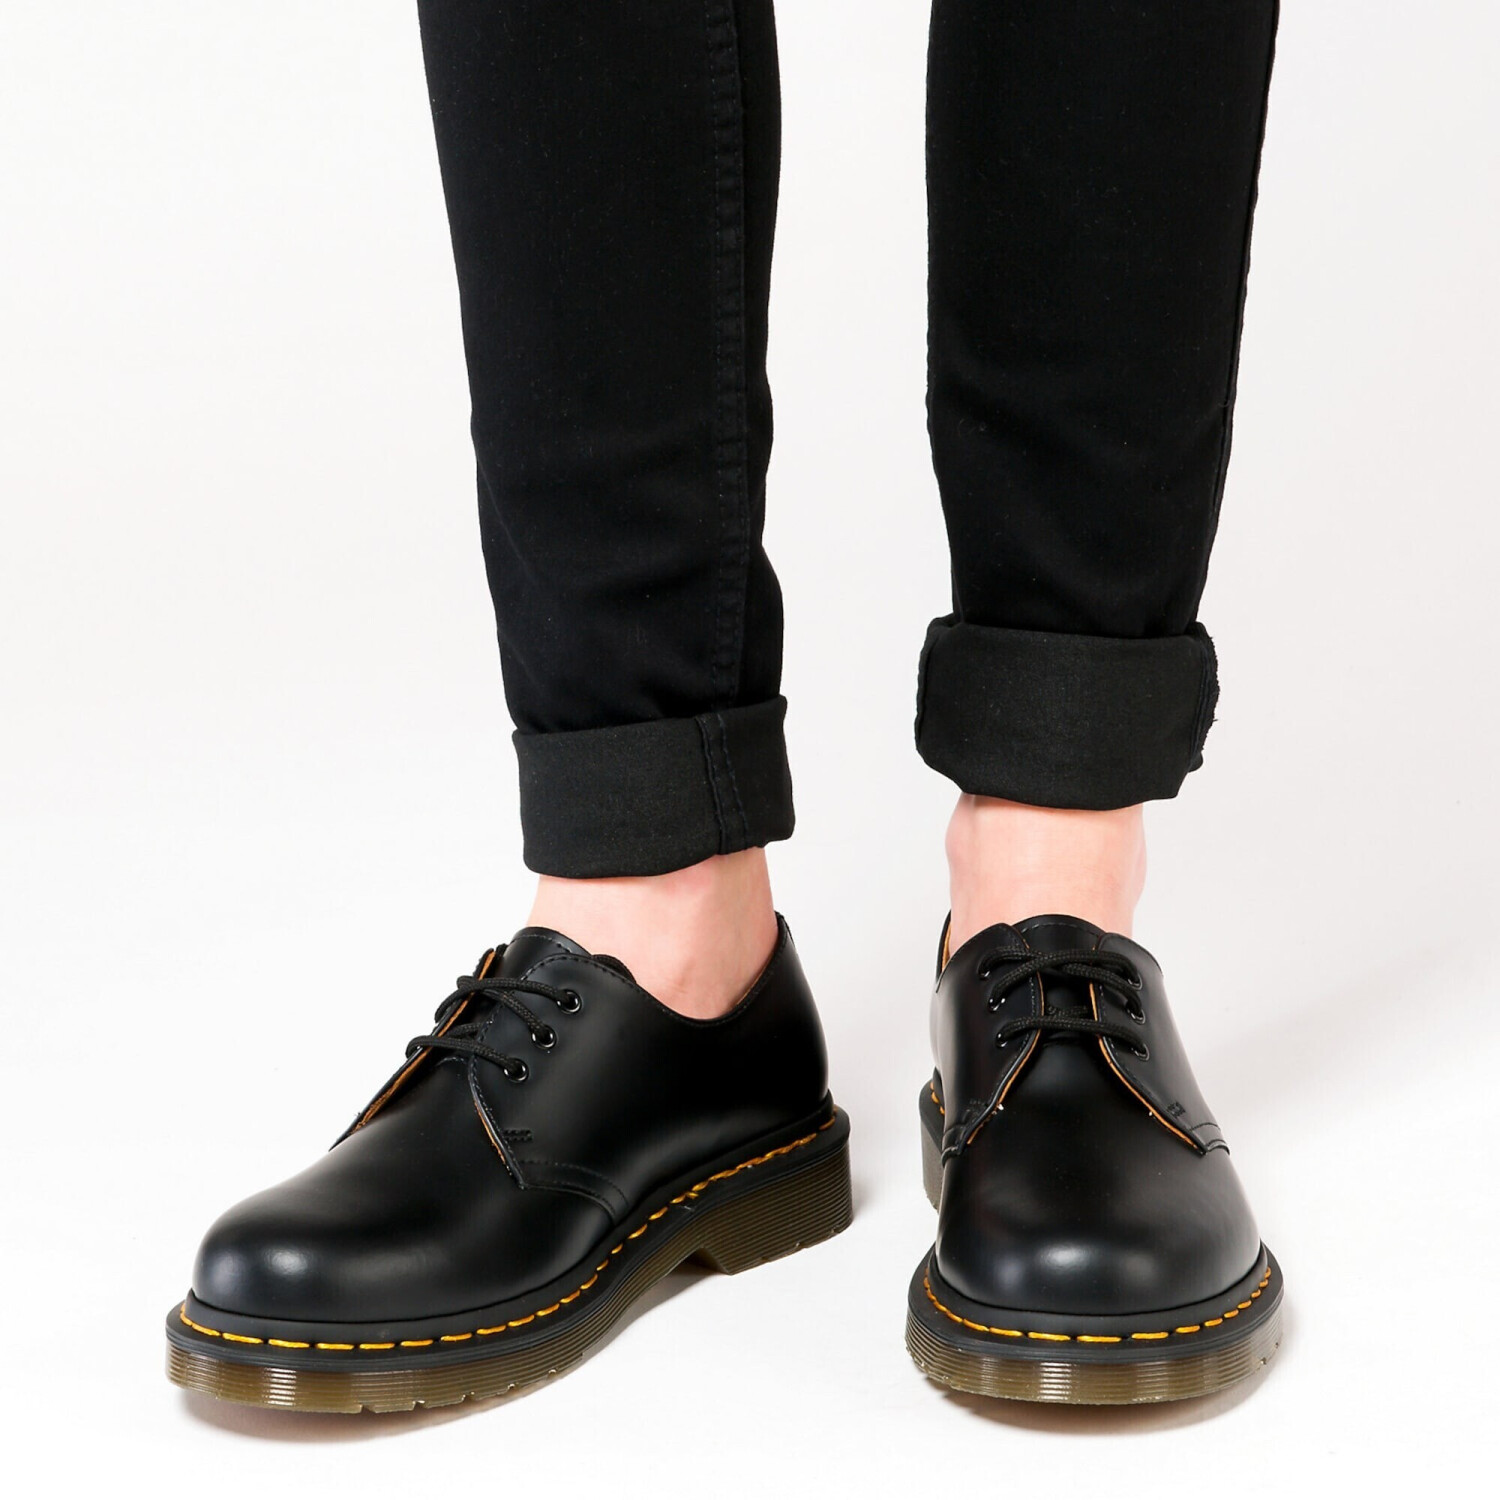 Buy Dr. Martens 1461 Black Smooth/Yellow Stitch from £89.00 (Today ...